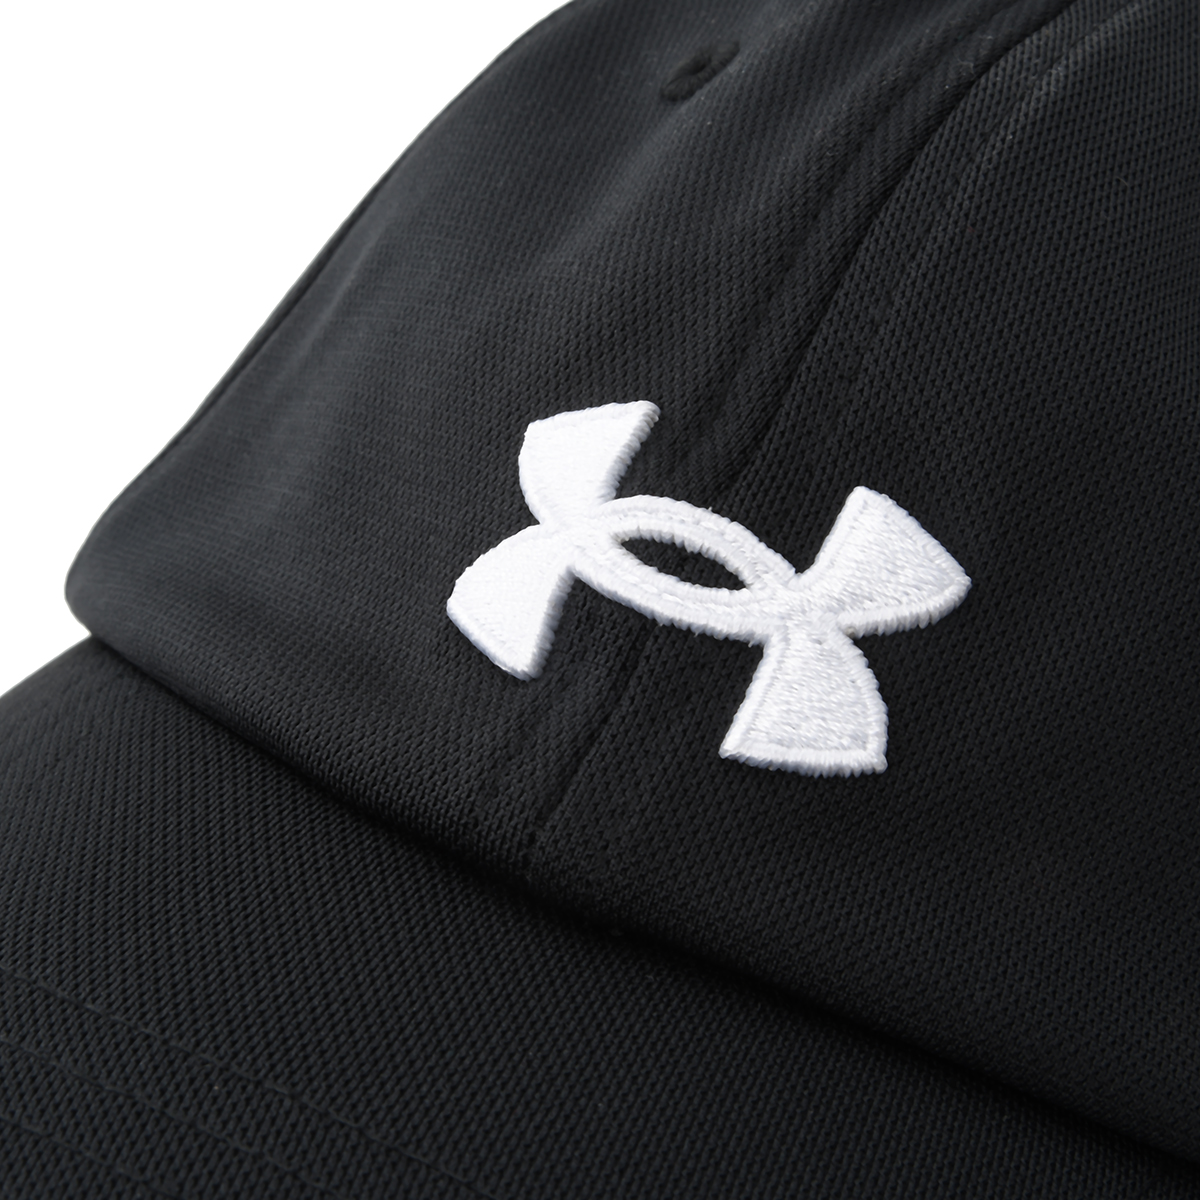 Gorra Under Armour Blitzing,  image number null